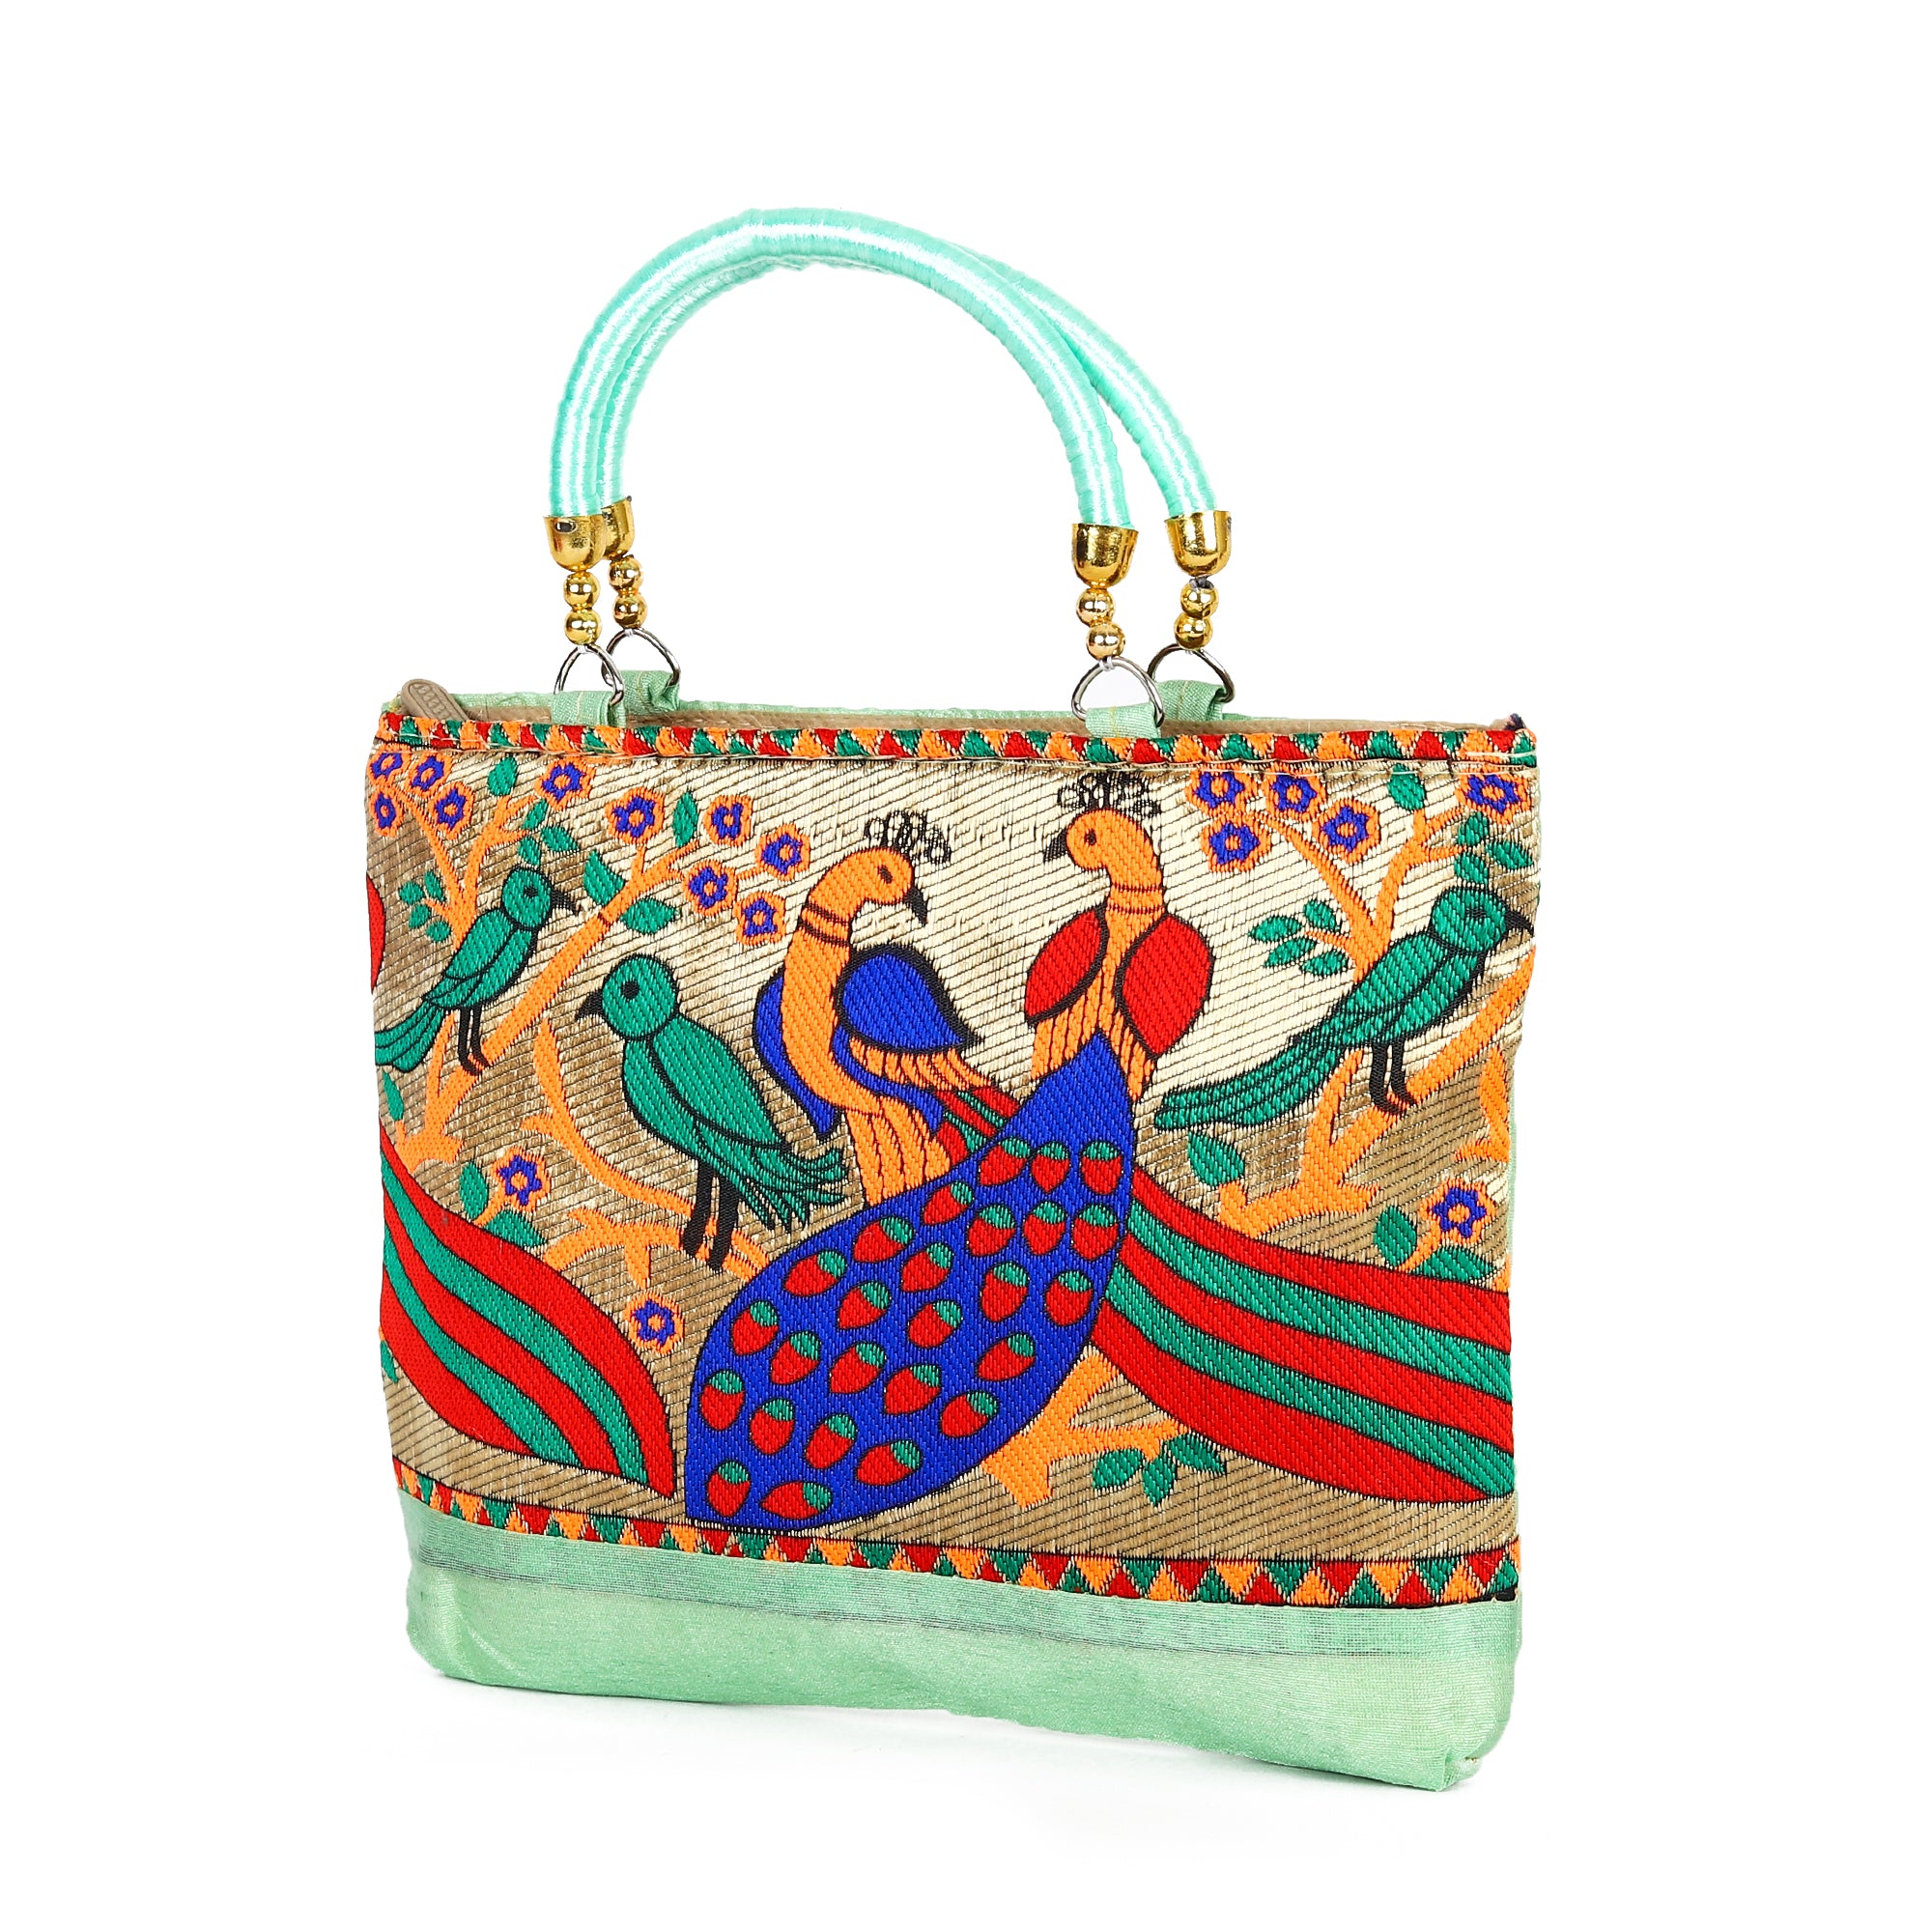 Buy Bag Craft India Private Limited Silk Hand Purses Online - Best Price  Bag Craft India Private Limited Silk Hand Purses - Justdial Shop Online.